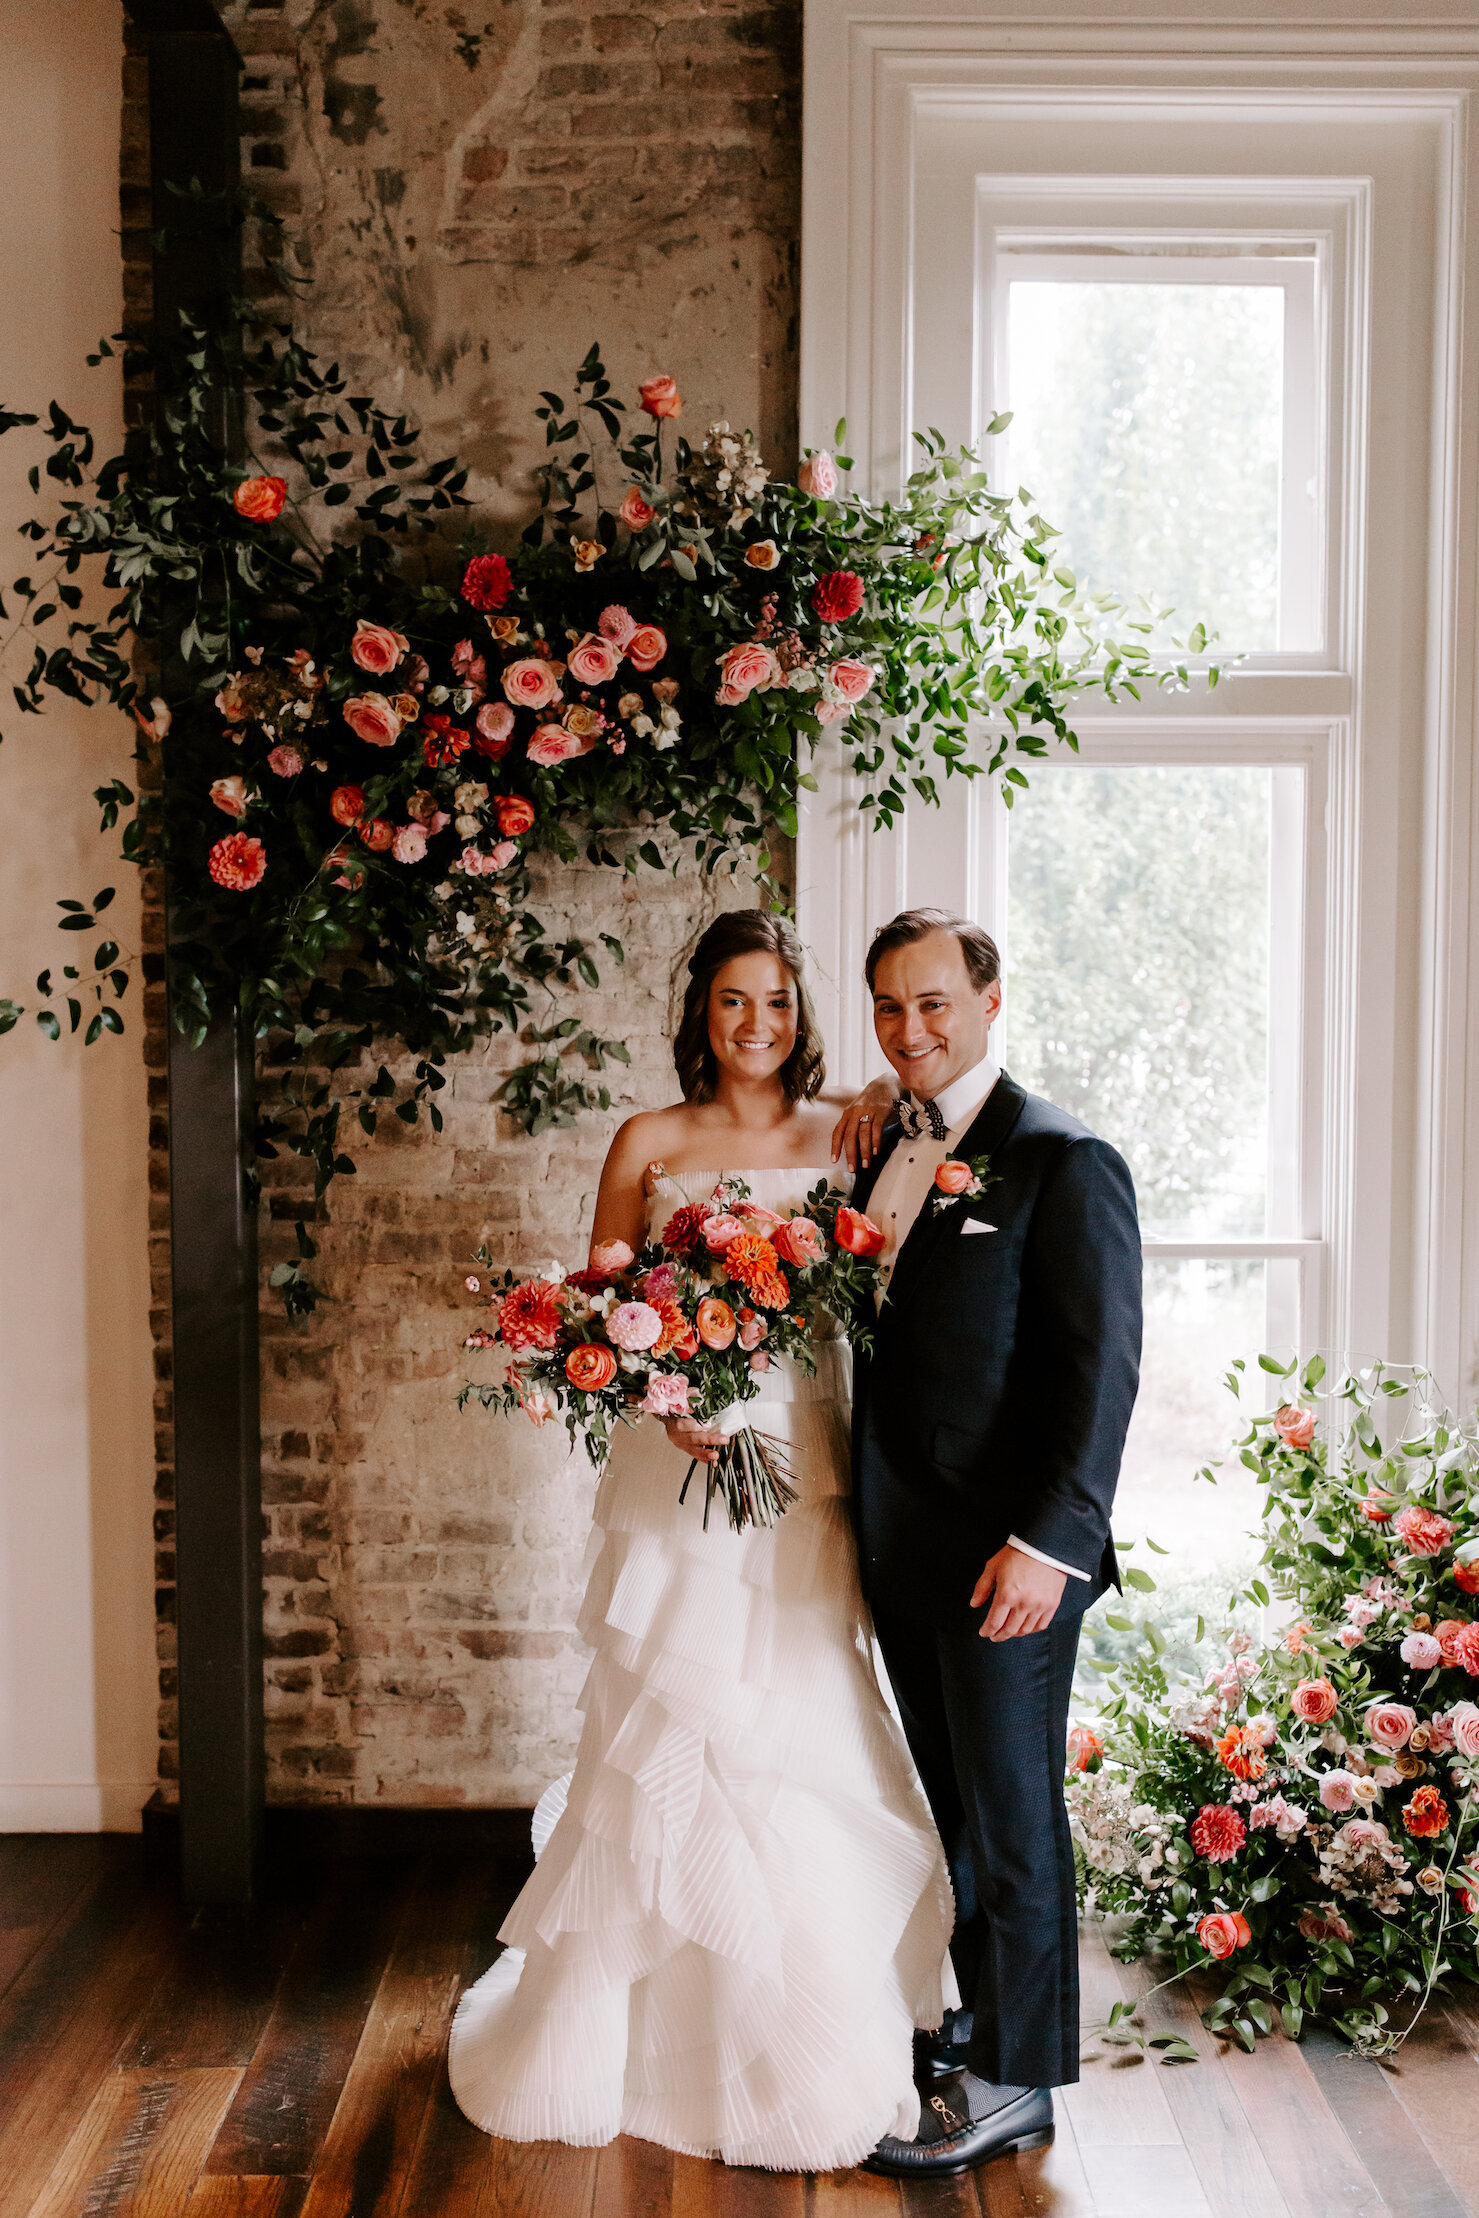 This wedding featured a stunning ceremony arch and a moss and floral wall installation. Blooms used were coral zinnias, fuchsia and blush dahlias, tangerine ranunculus, petal-heavy roses, pink snowberry, and sprawling smilax vine. Designed by Nashvi…